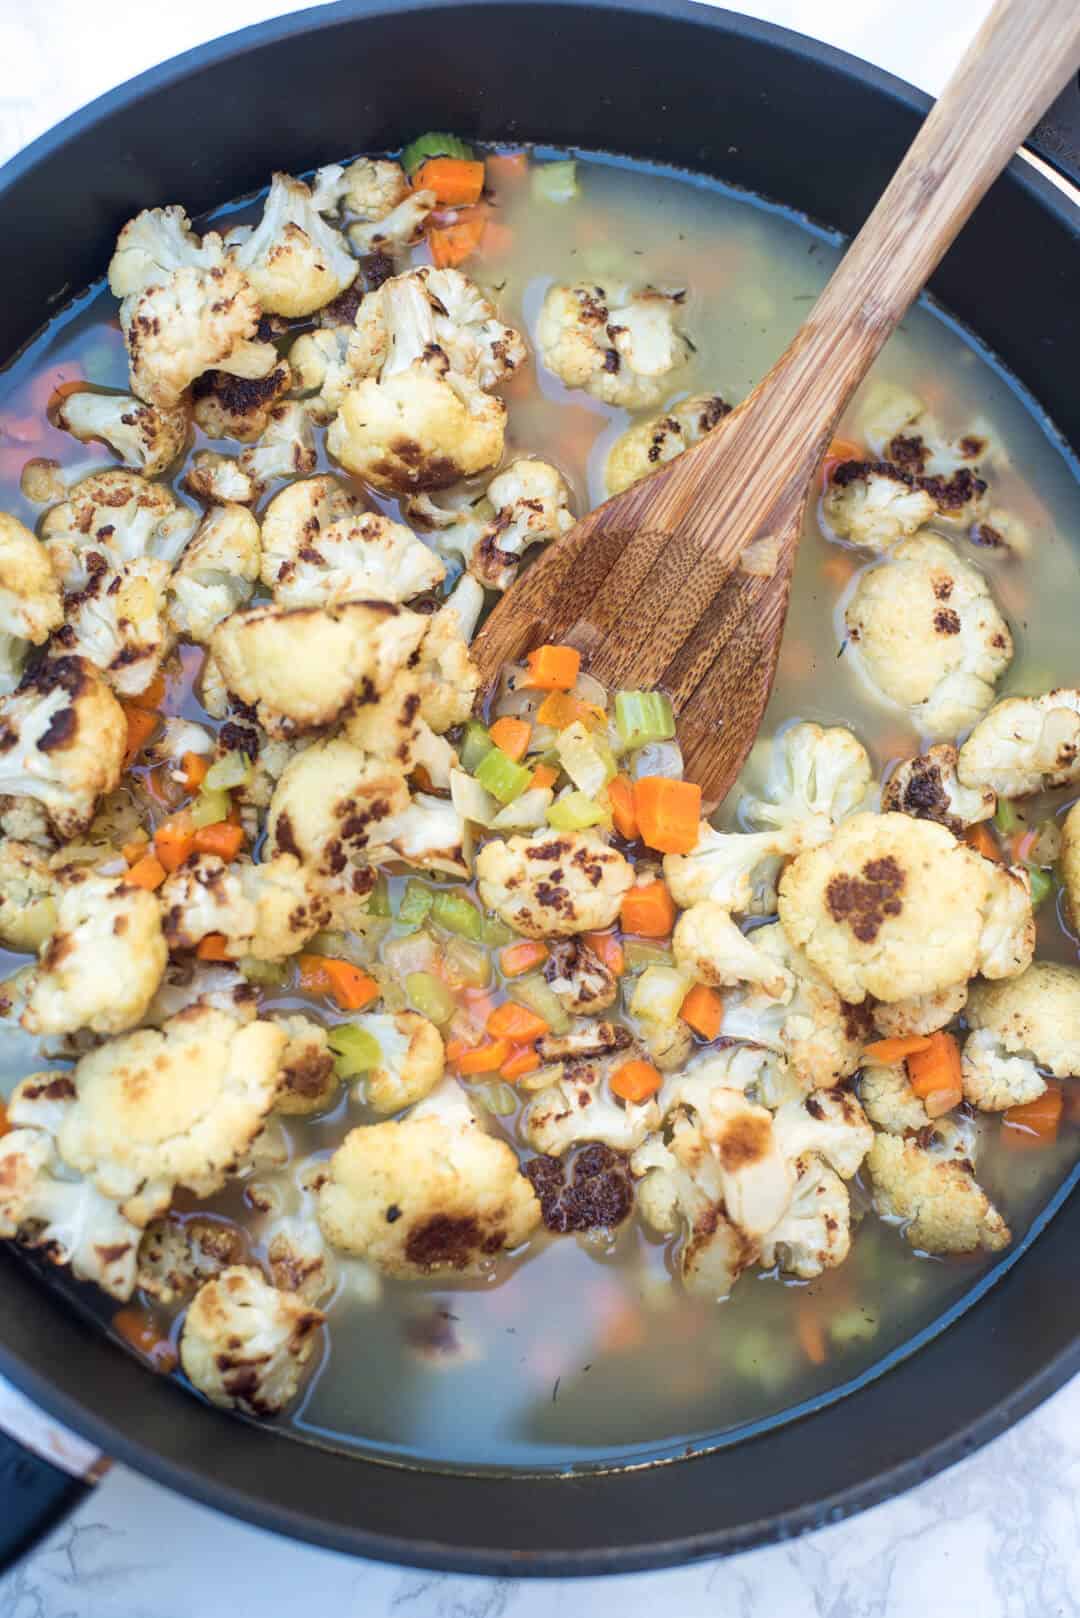 Broth in a skillet with cauliflower and other vegetables.